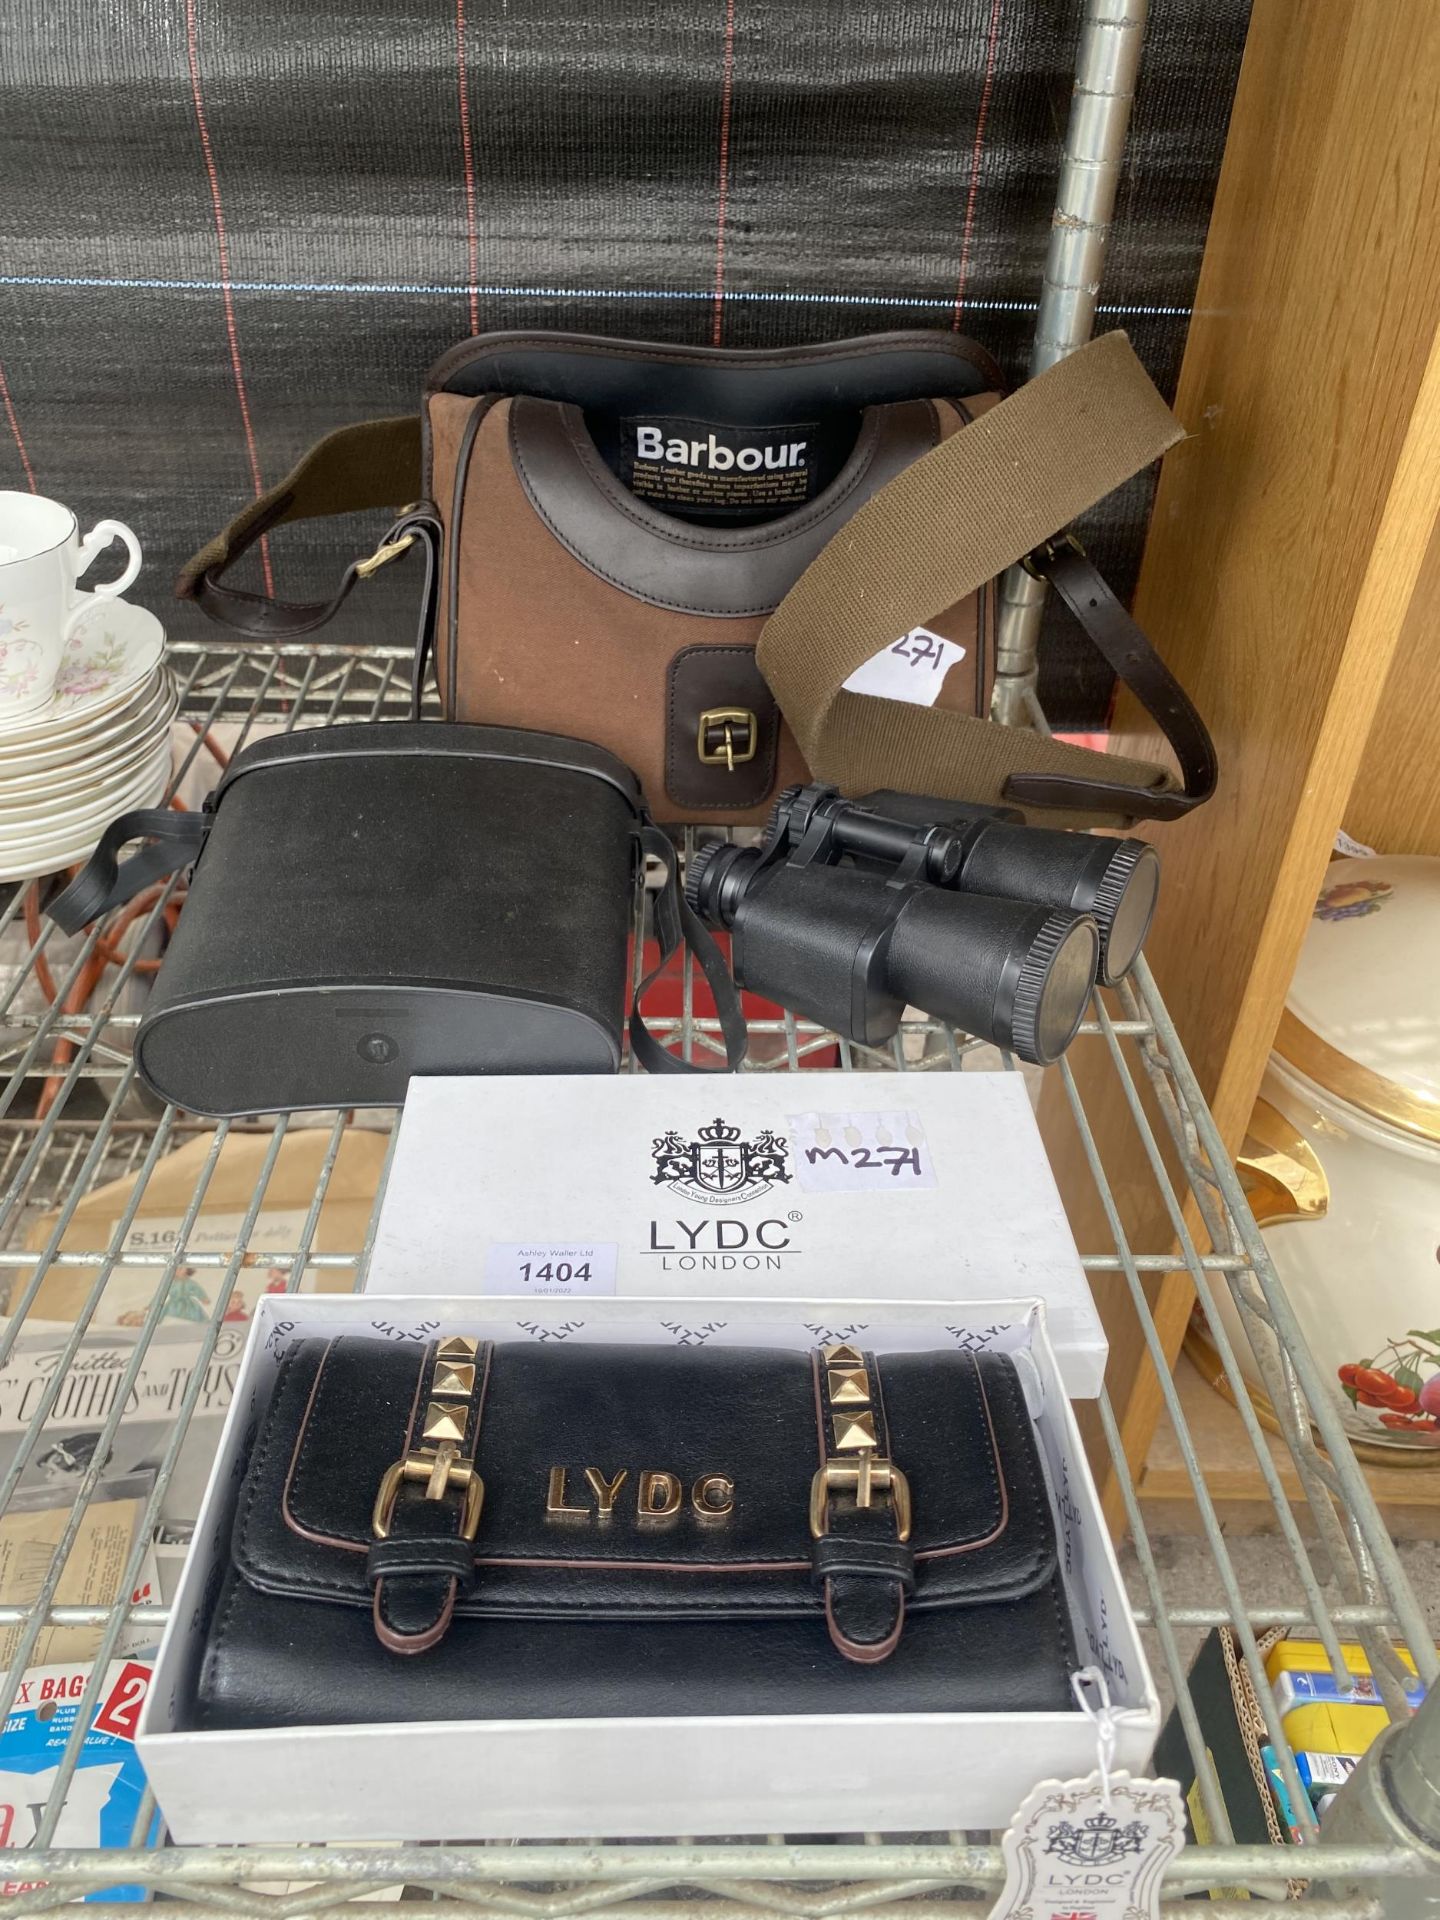 A BARBOUR CARRY CASE, BINOCULARS AND AN LYDC LONDON PURSE